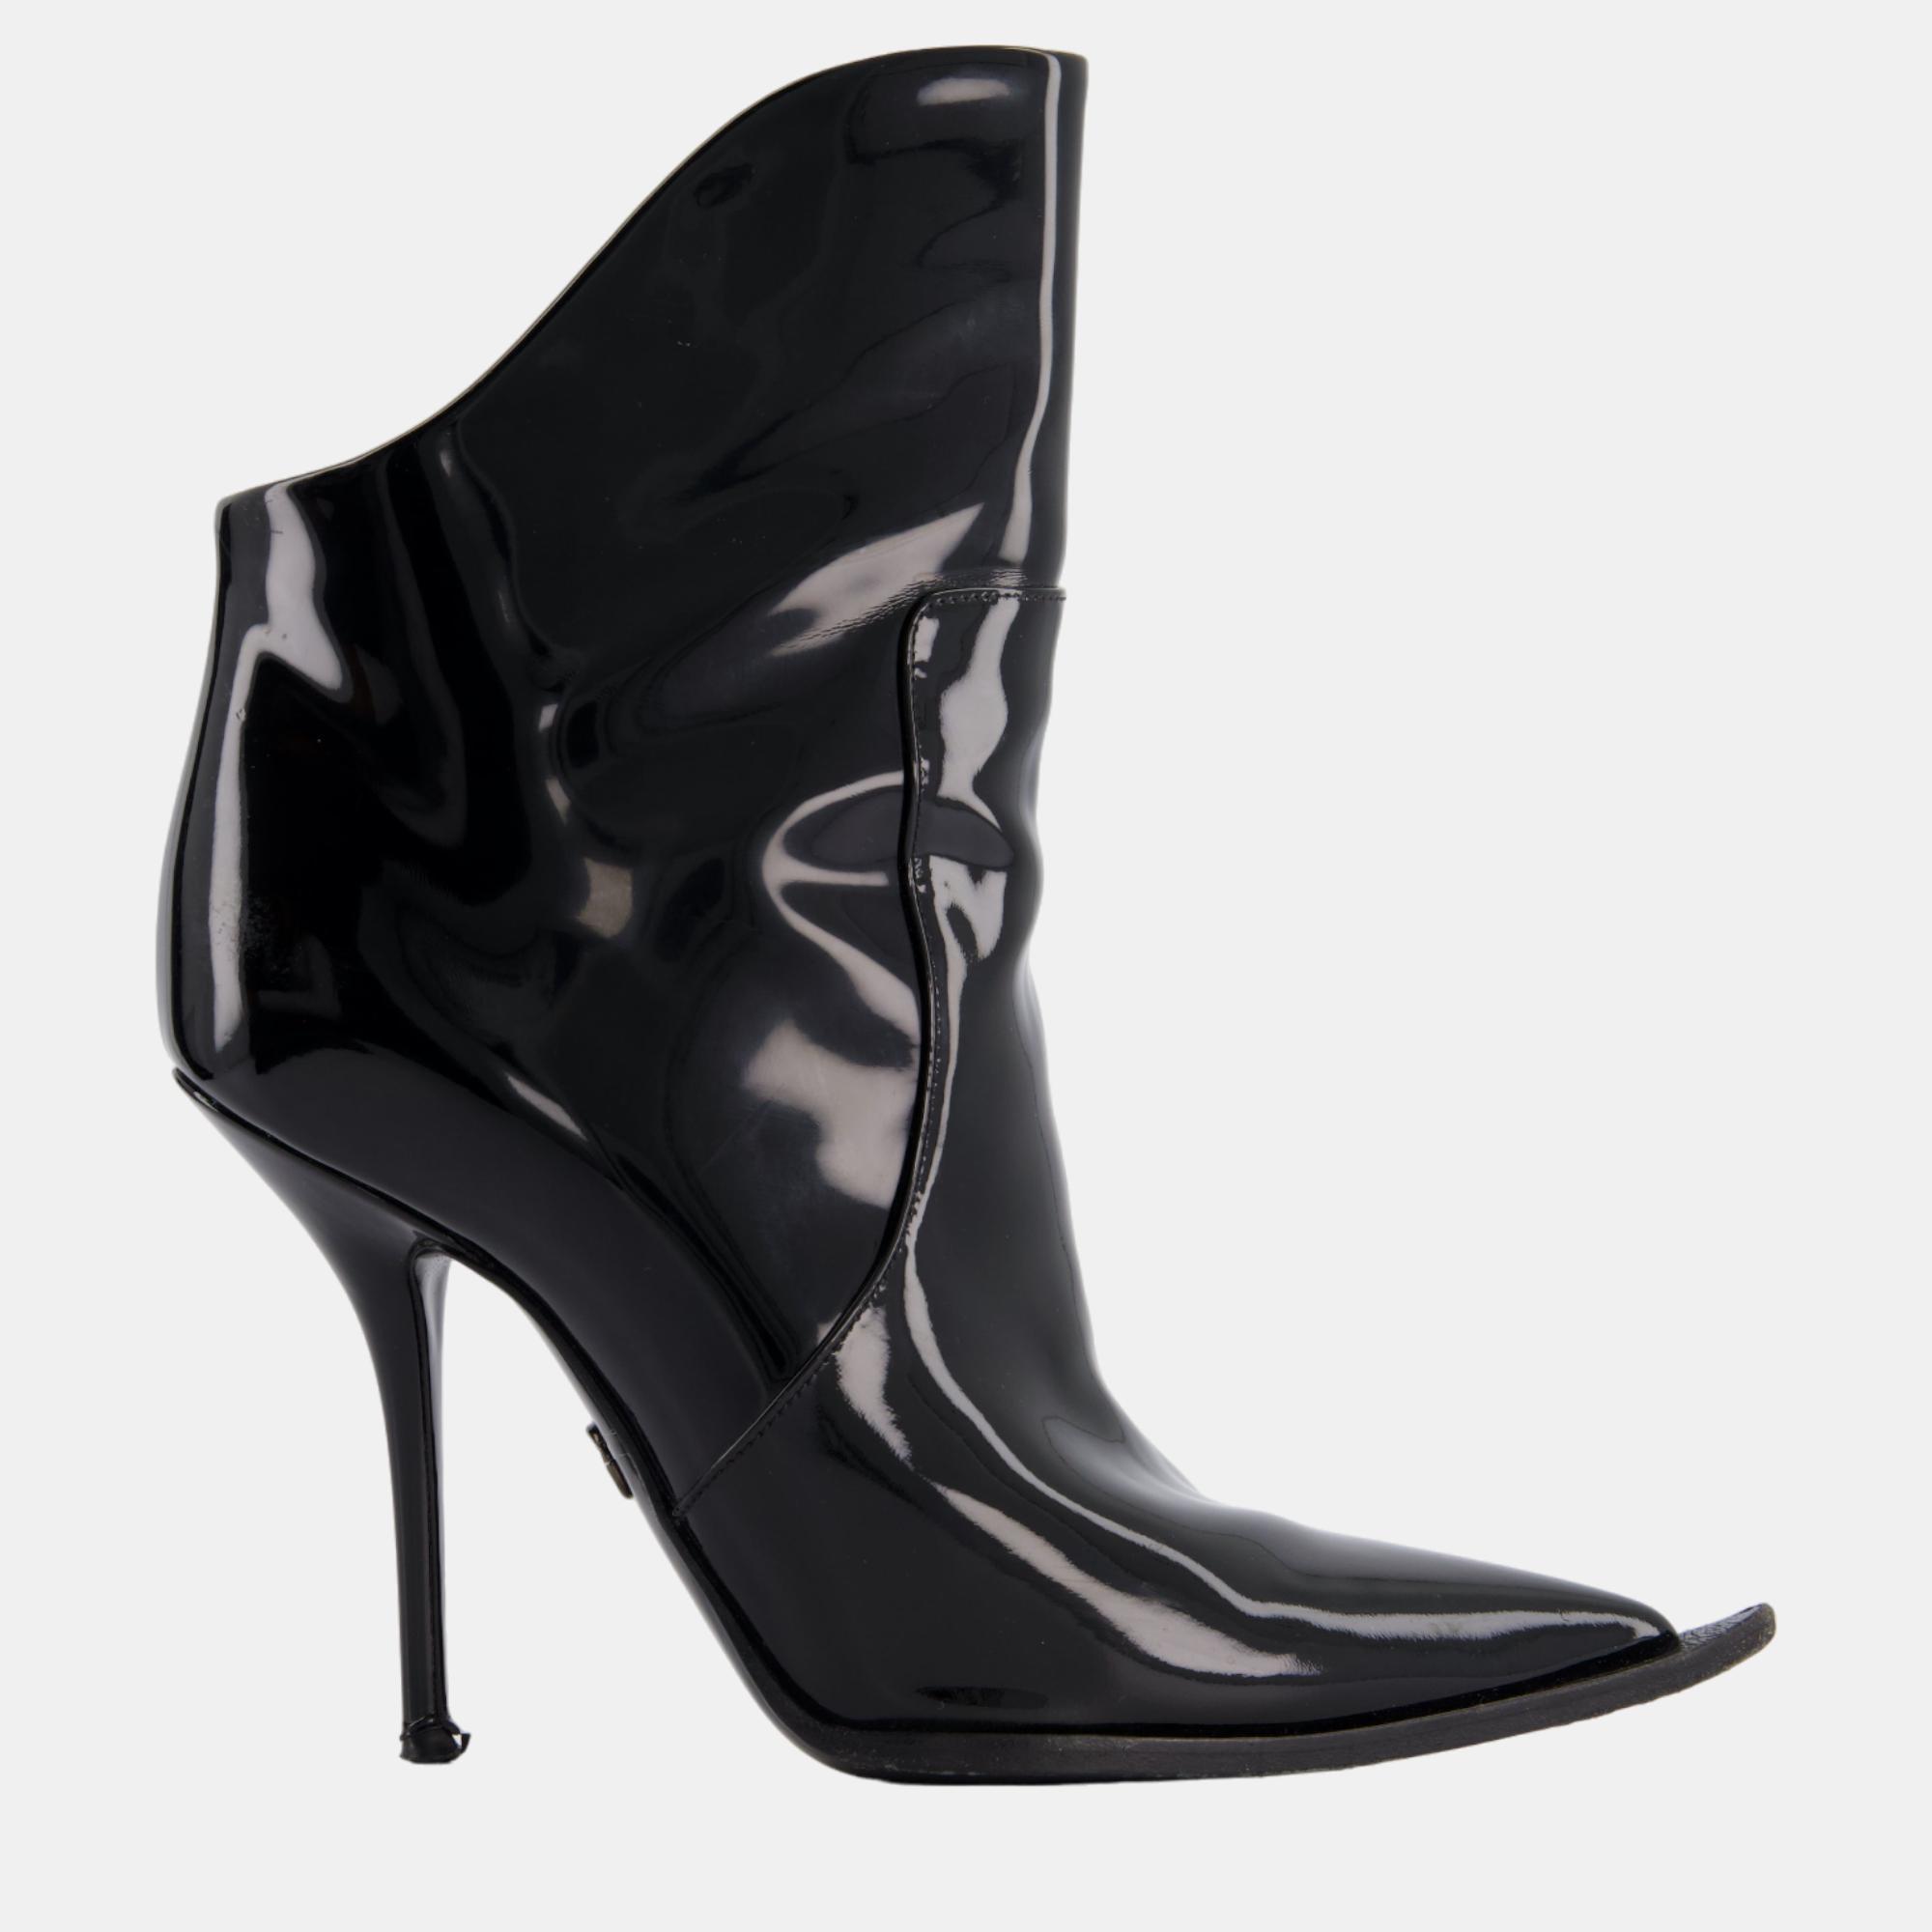 Dolce & gabbana black patent pointed ankle boots size eu 37